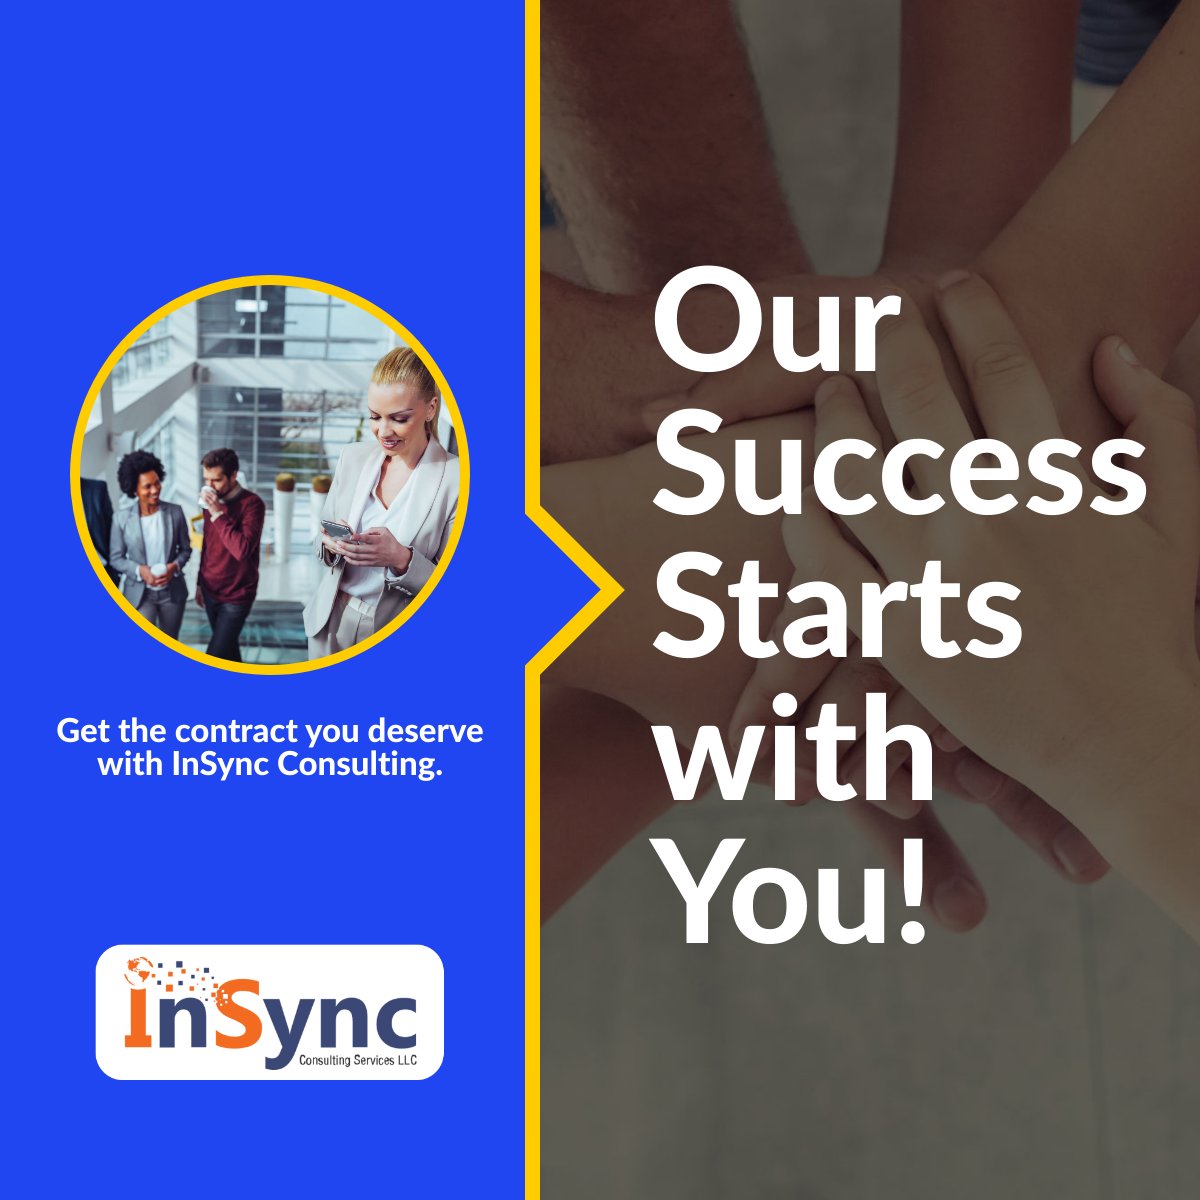 Passion first and everything will fall into place. Visit us at insynconline.net #nurse #payroll #nursing #ITJobs #payrolljobs #employment #aprn #team #nurselife #staffing #travelnursing #rnjobs #rn #lpn #nursejobs #technology #healthcare #eor